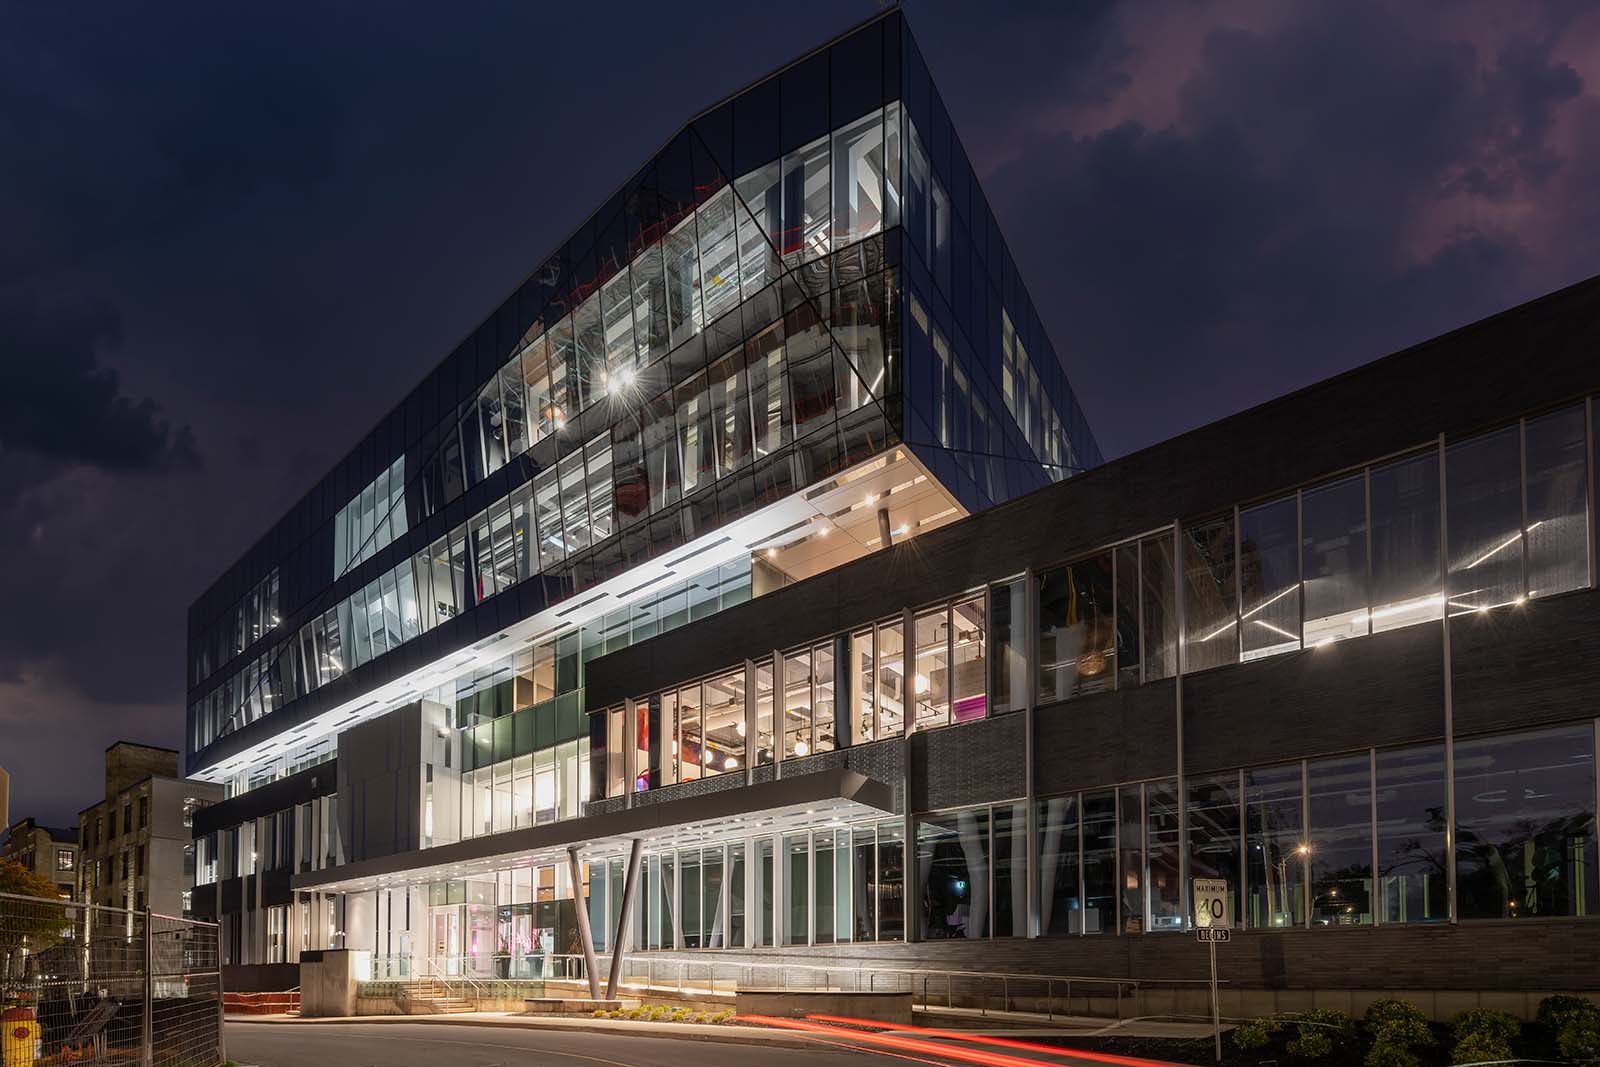 TEK Tower is located in Kitchener's Innovation District